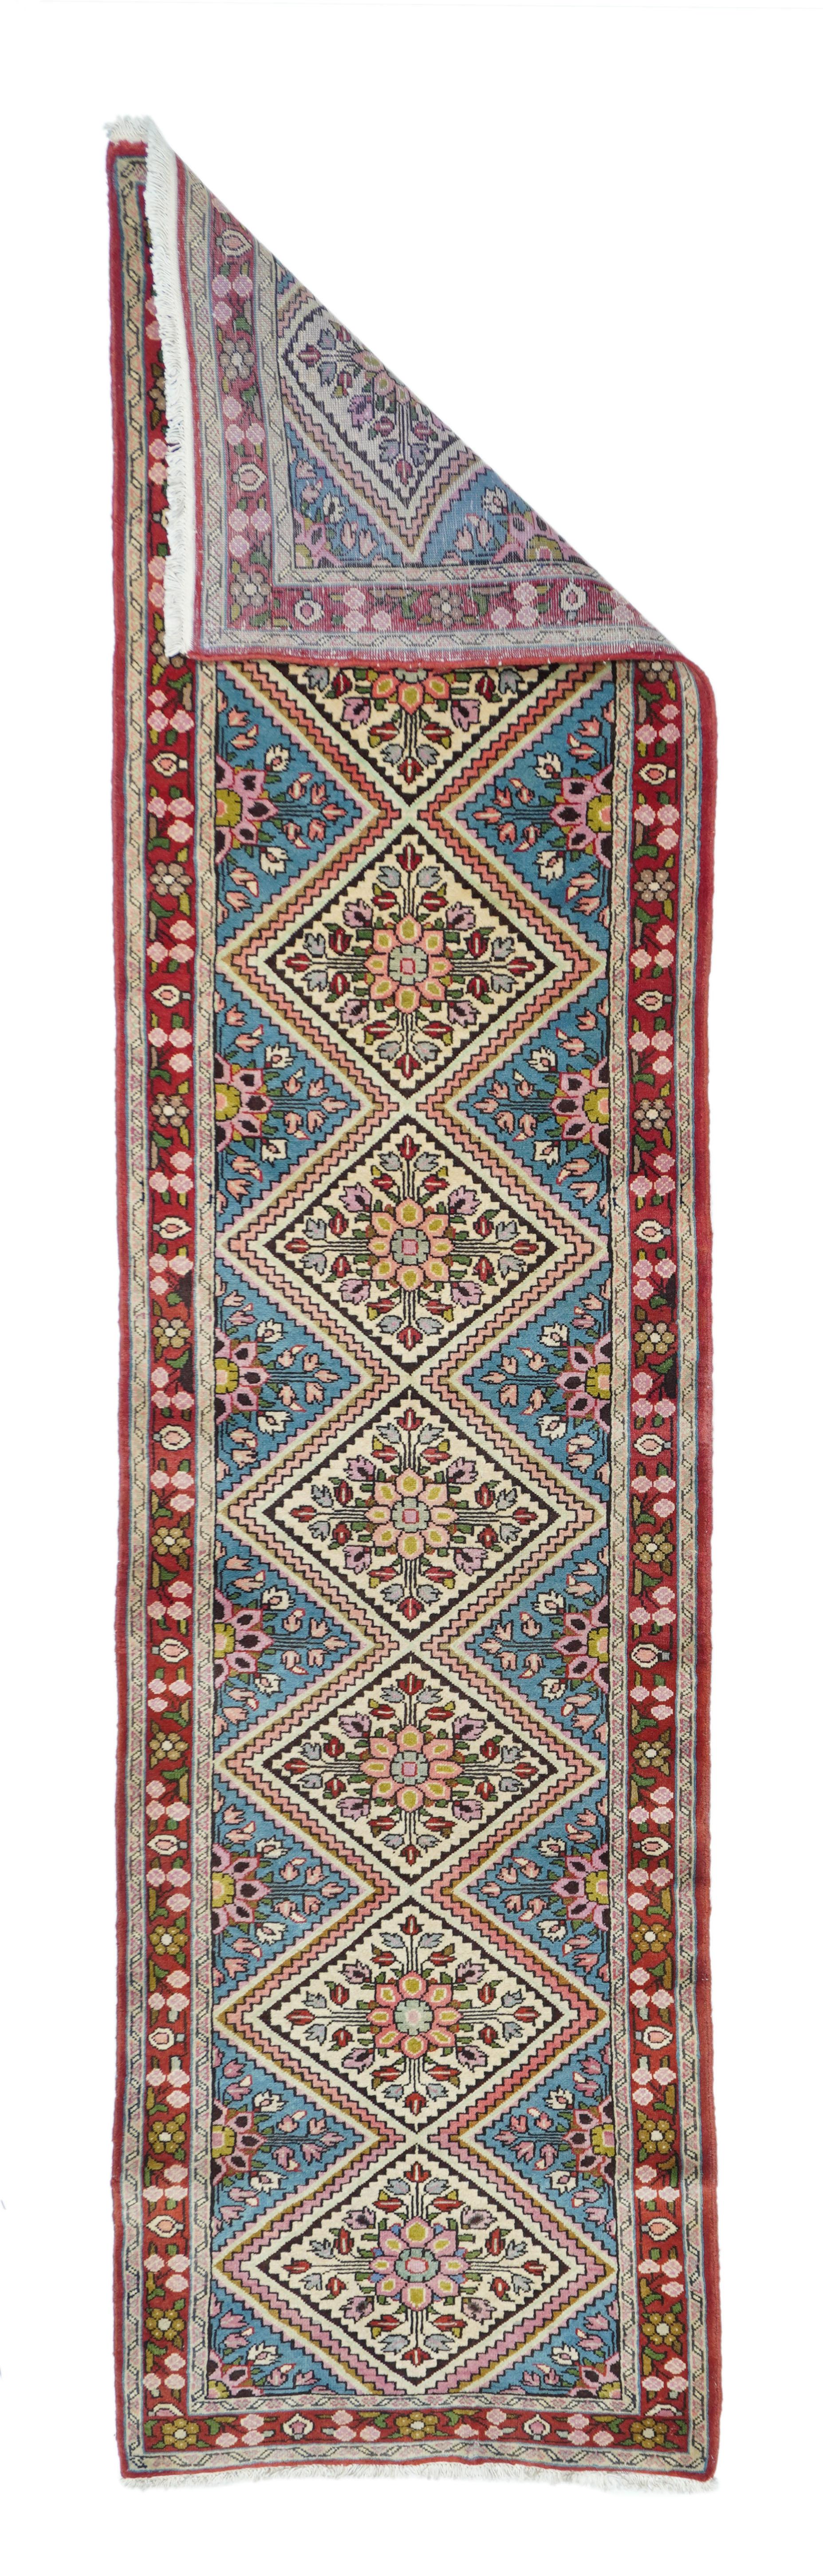 Vintage Sarouk runner. Measures: 2.4'' x 9.11''. The light blue field is relegated to triangles along the sides, while a double zig-zag defines the central pole medallion of eight complete lozenges with octofoil rosette centres. En suite